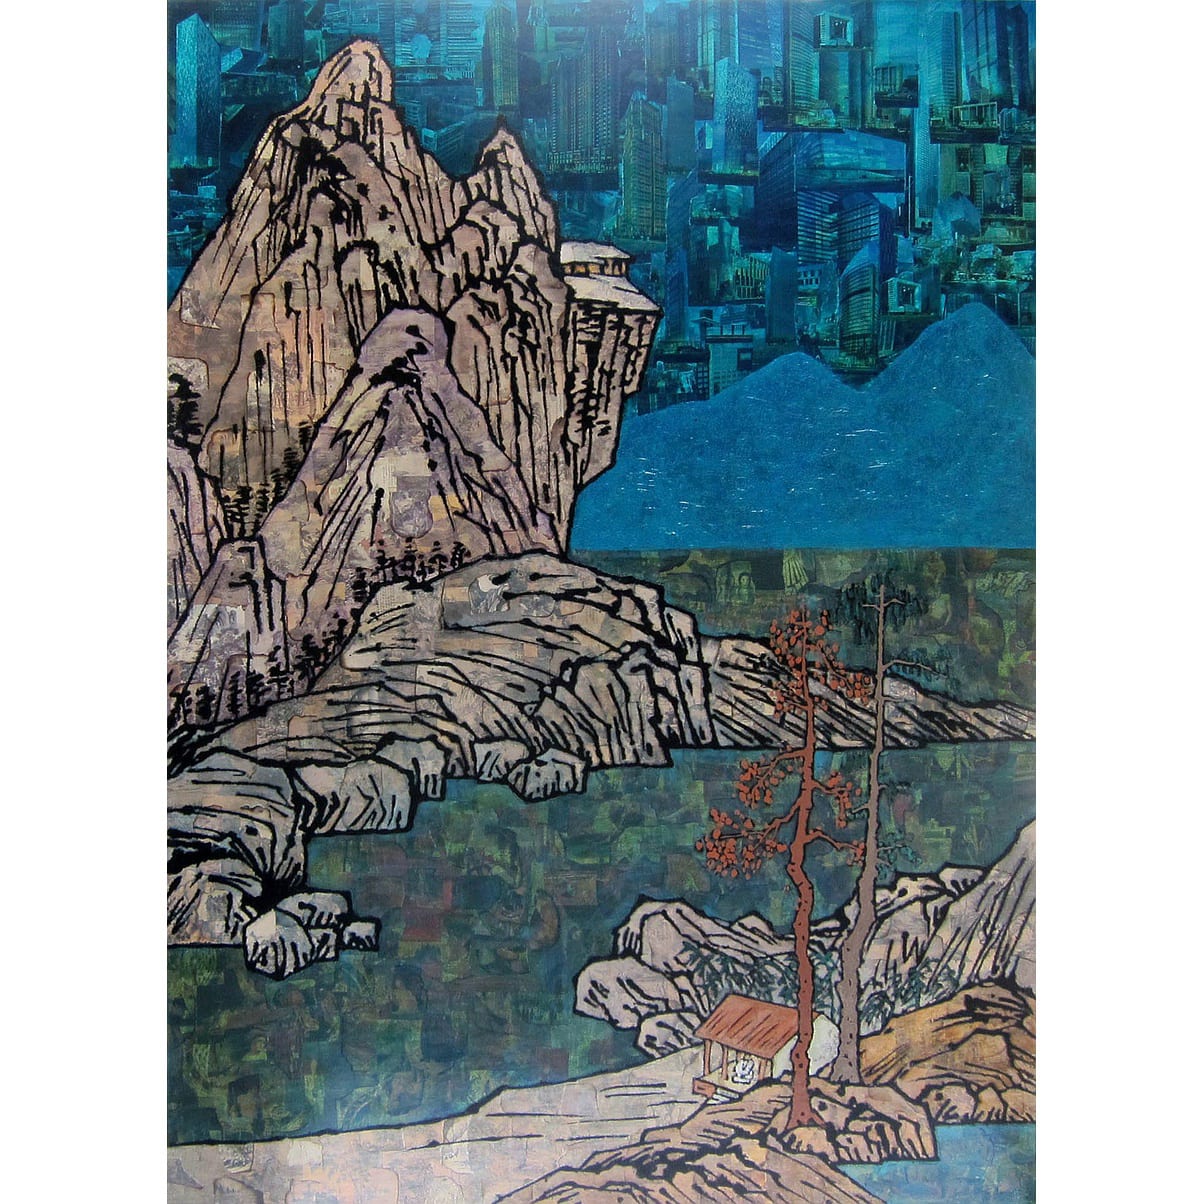 Xue Song 薛 松, Landscape of Tranquility《靜觀》, 2011